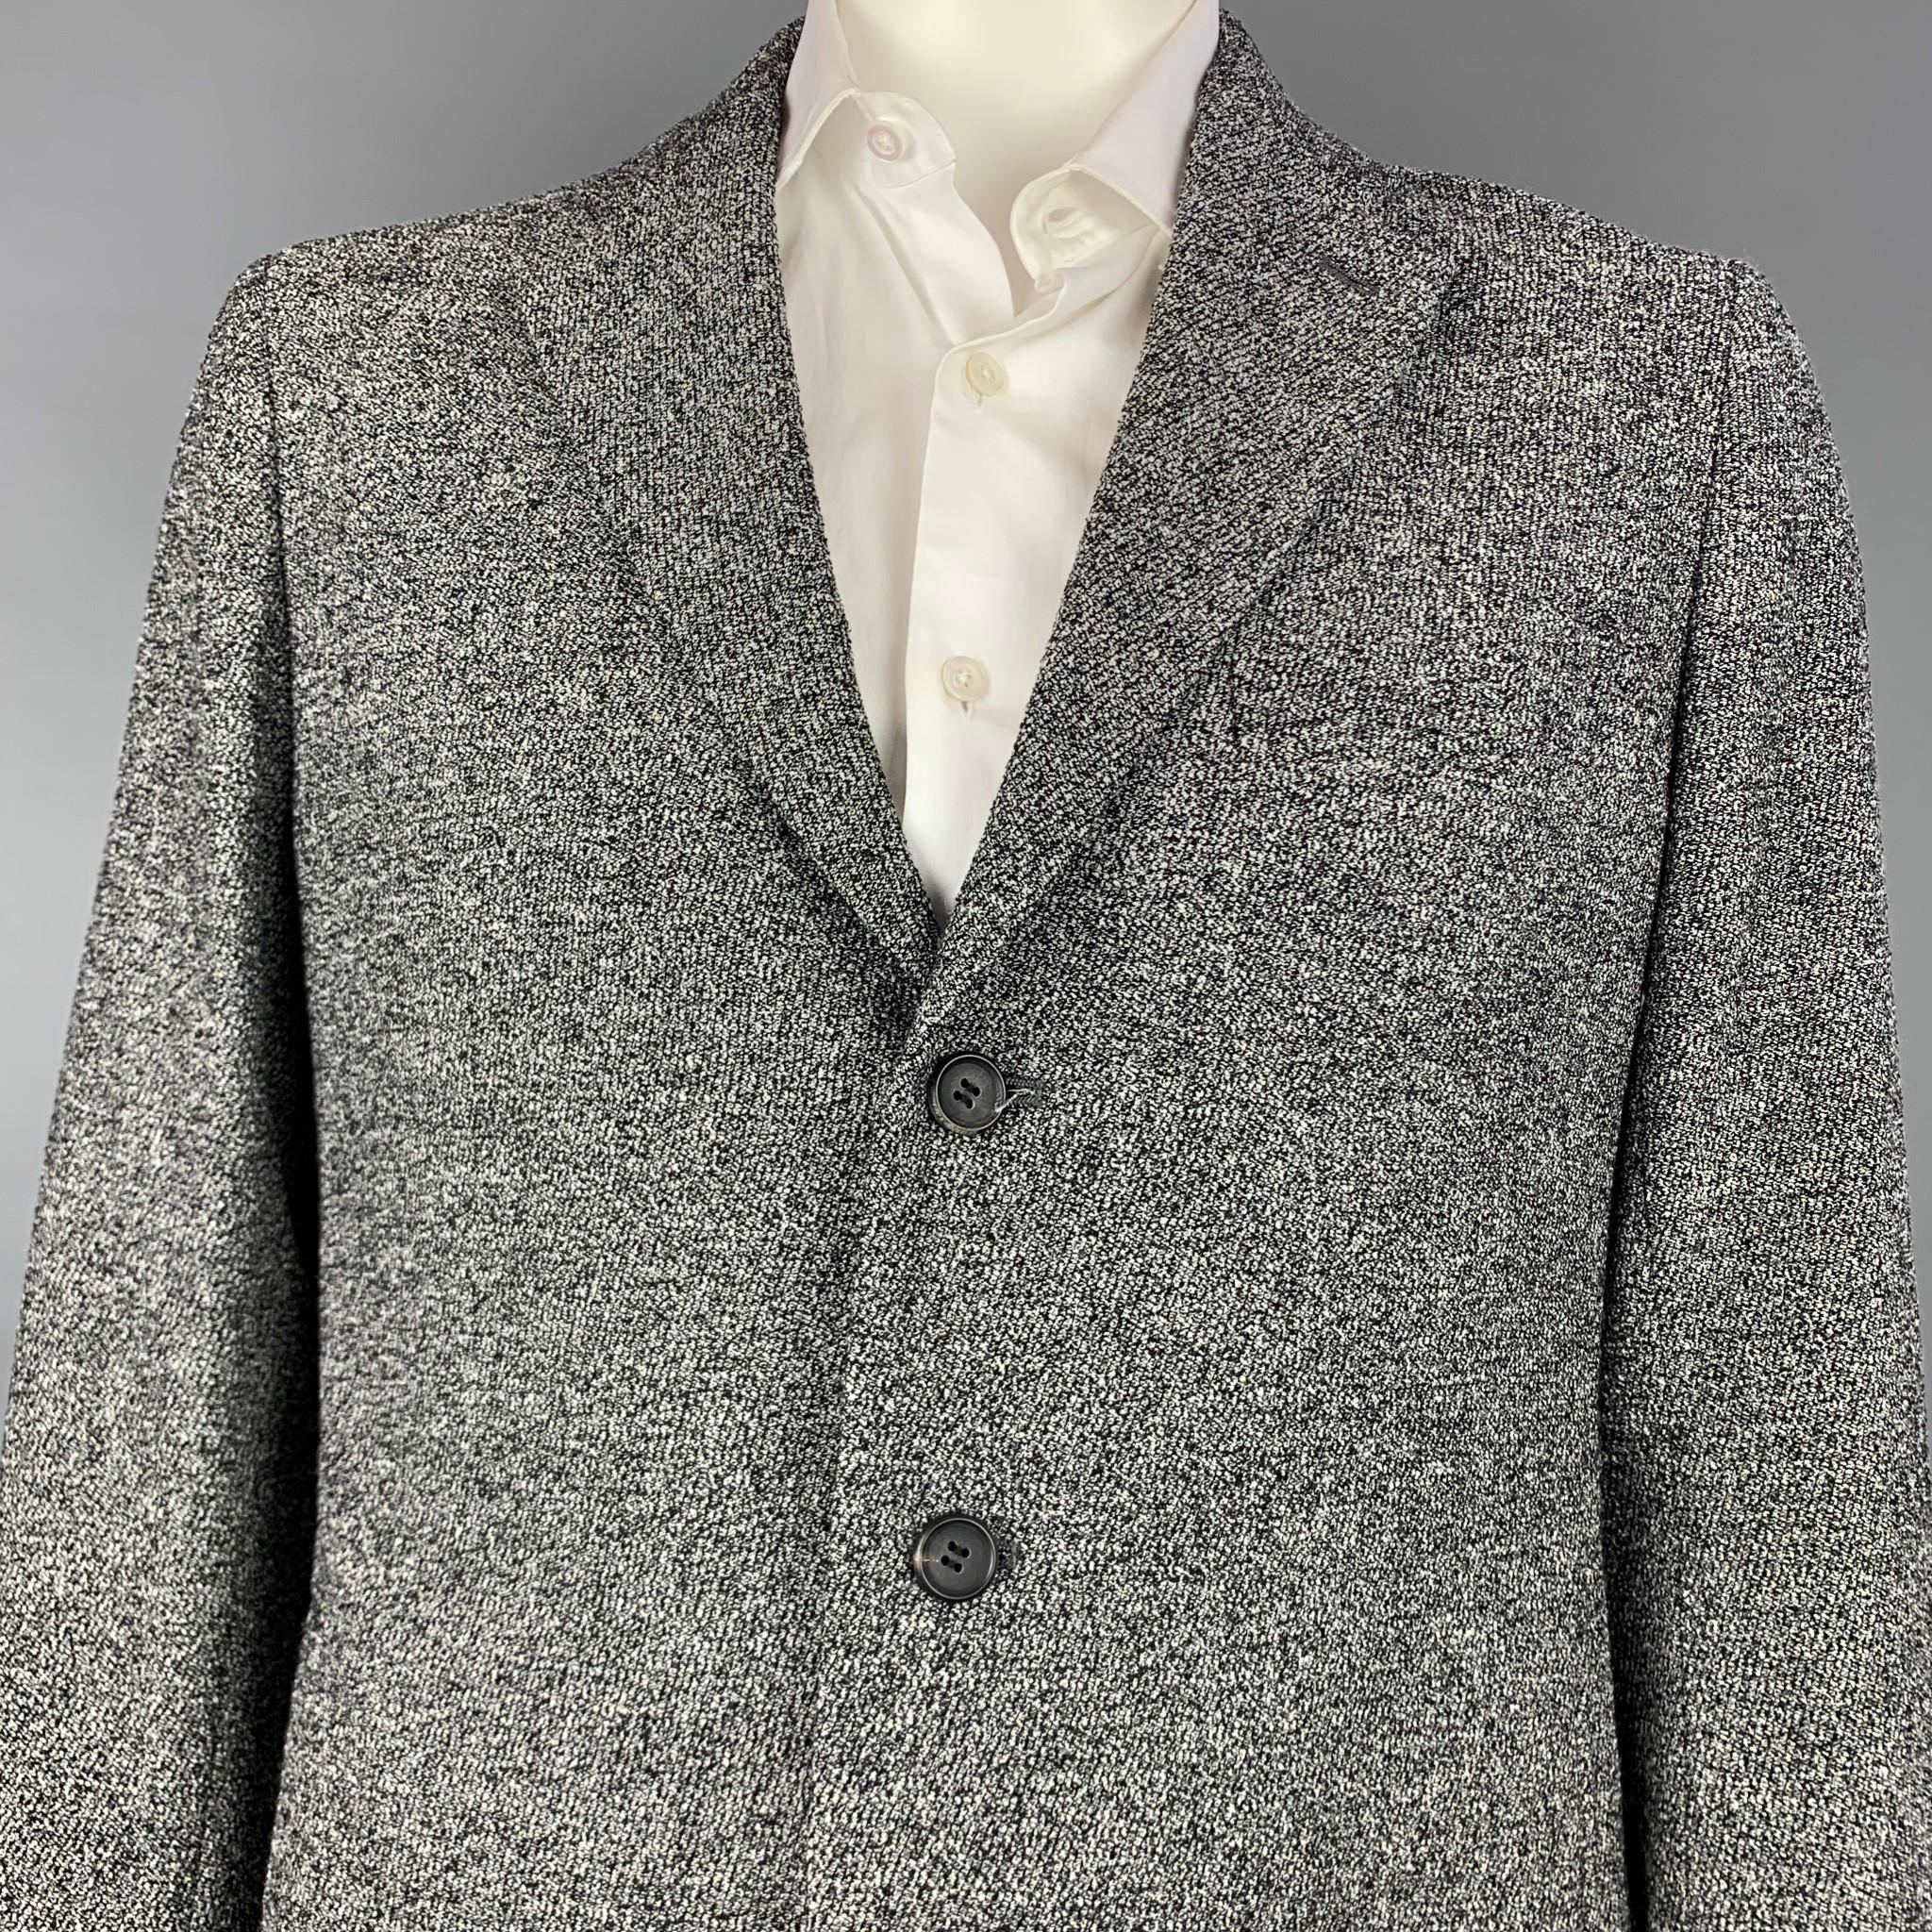 ISSEY MIYAKE sport coat comes in a black & white textured material with a full liner featuring a notch lapel, slit pockets, and a three button closure.

Very Good Pre-Owned Condition.
Marked: 3

Measurements:

Shoulder: 18 in.
Chest: 44 in.
Sleeve: